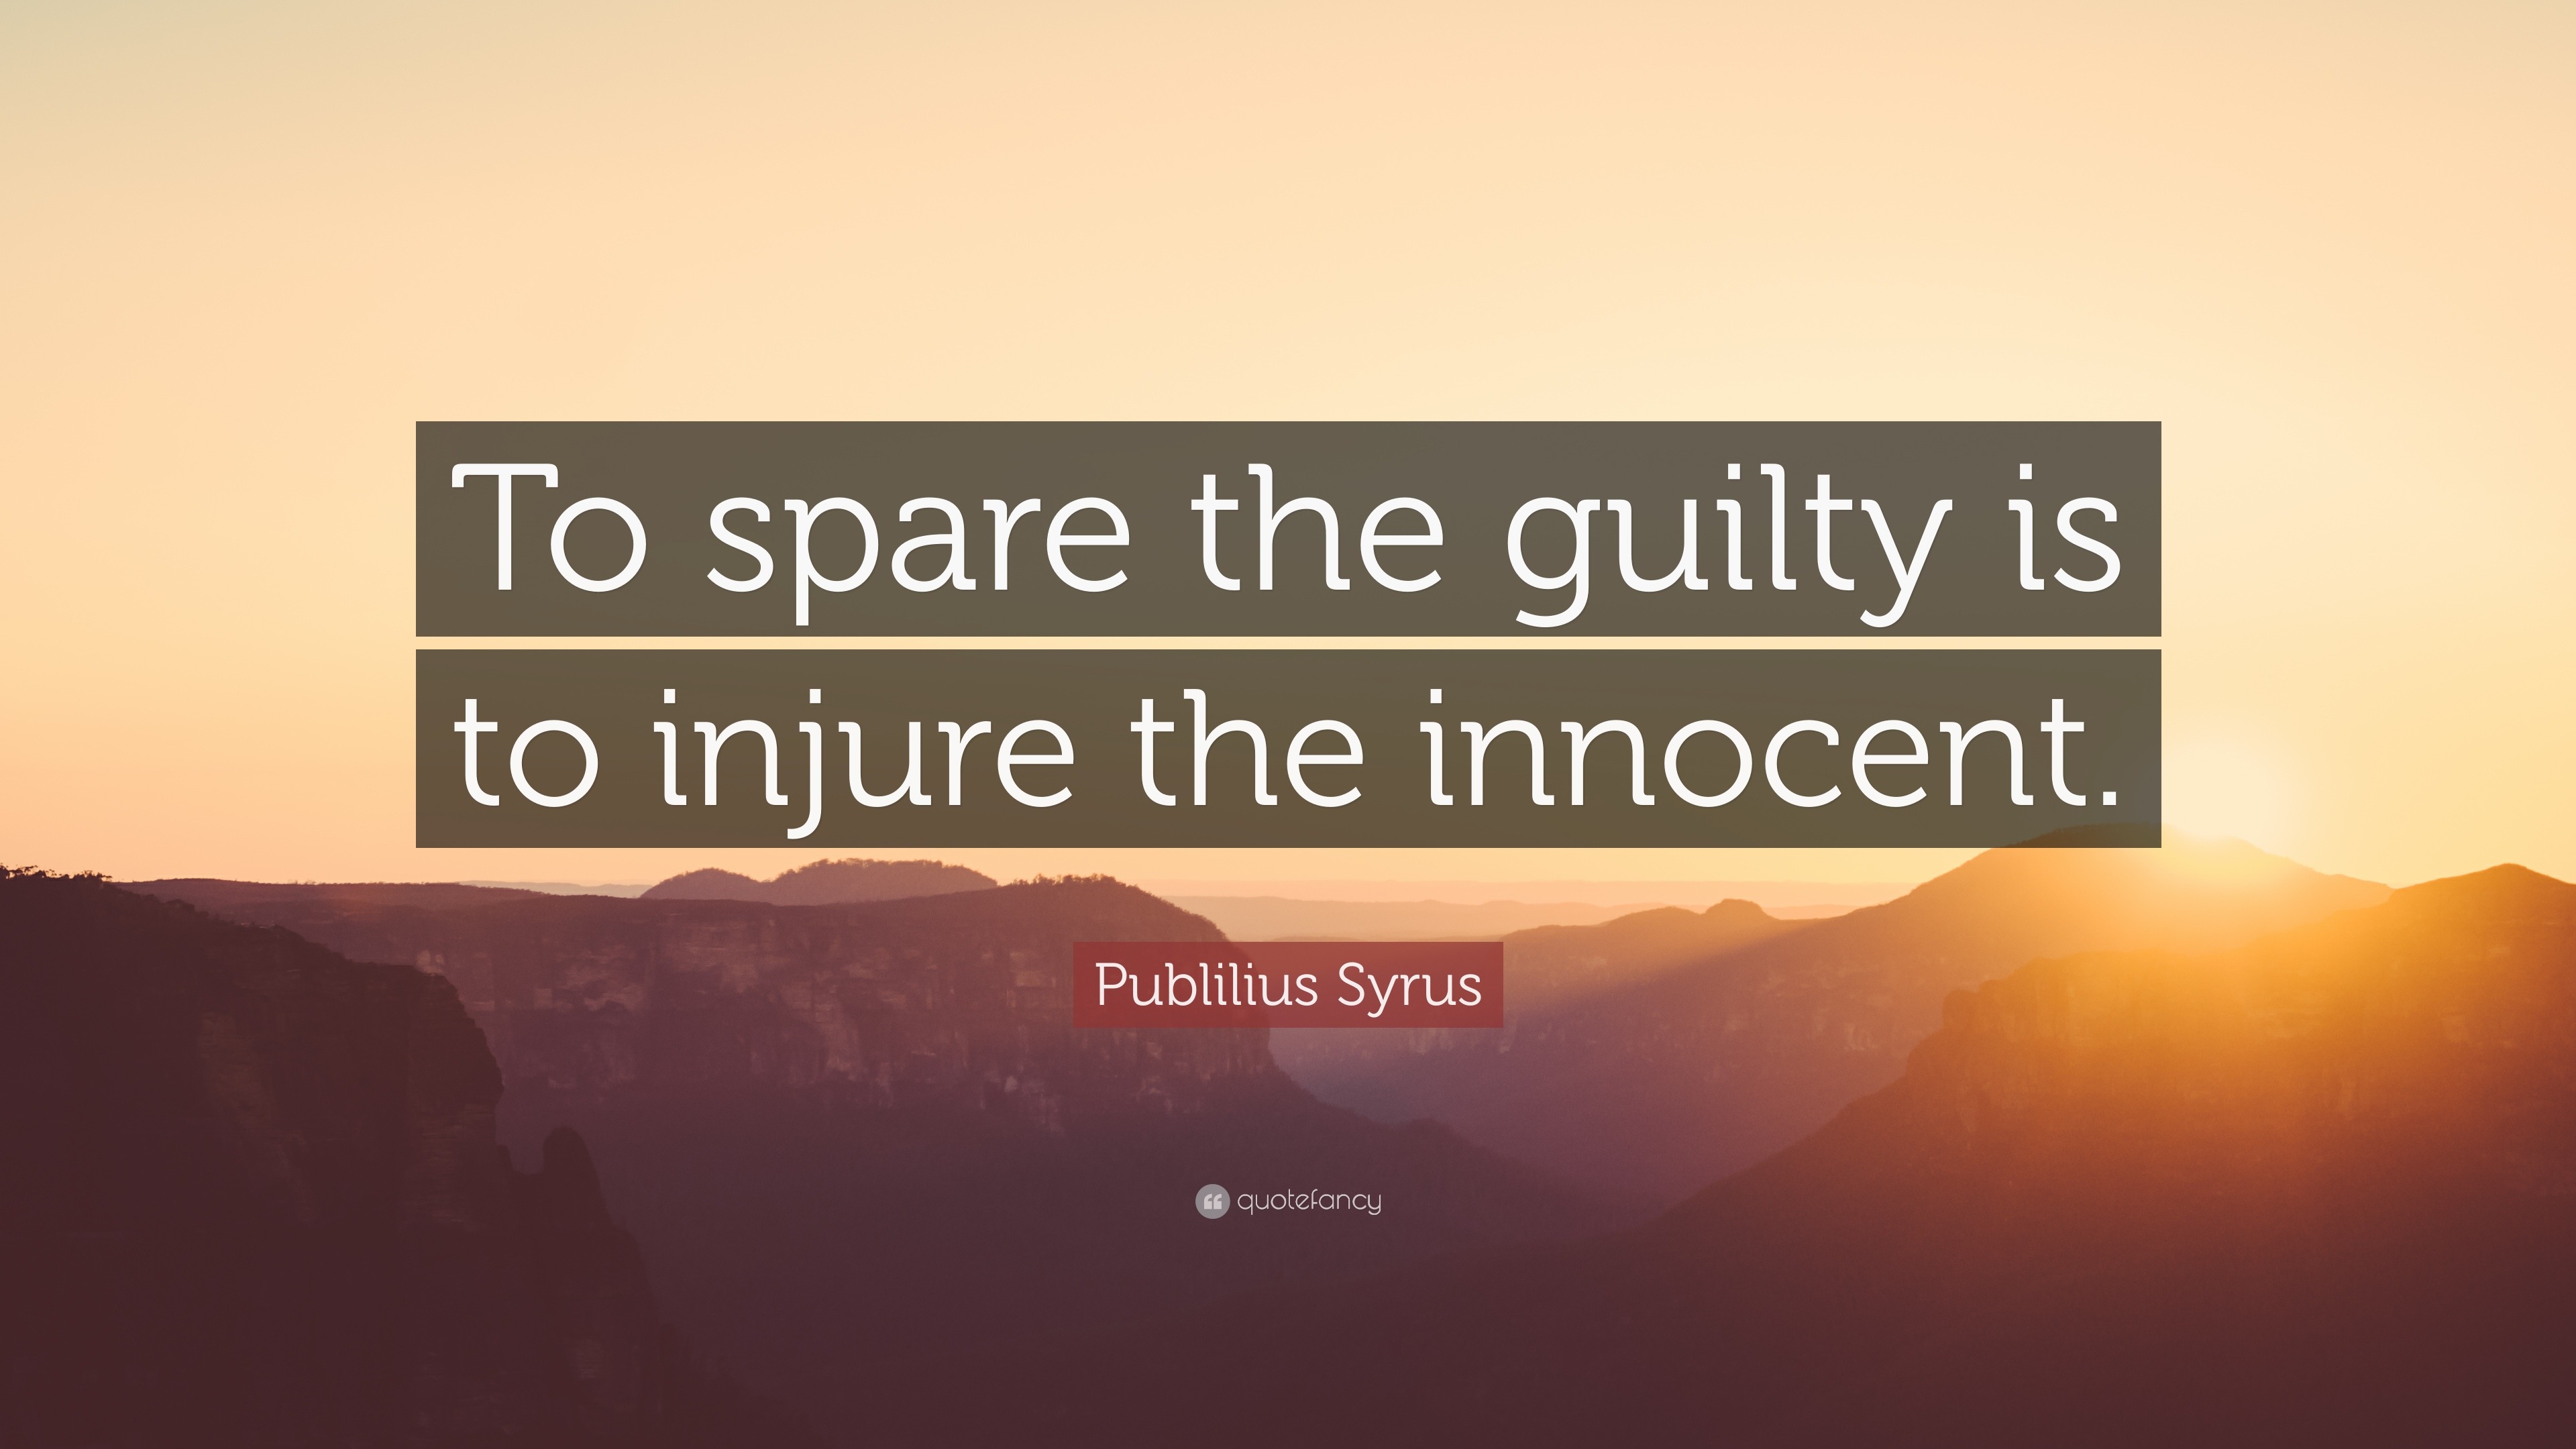 Publilius Syrus Quote: “To spare the guilty is to injure the innocent.”